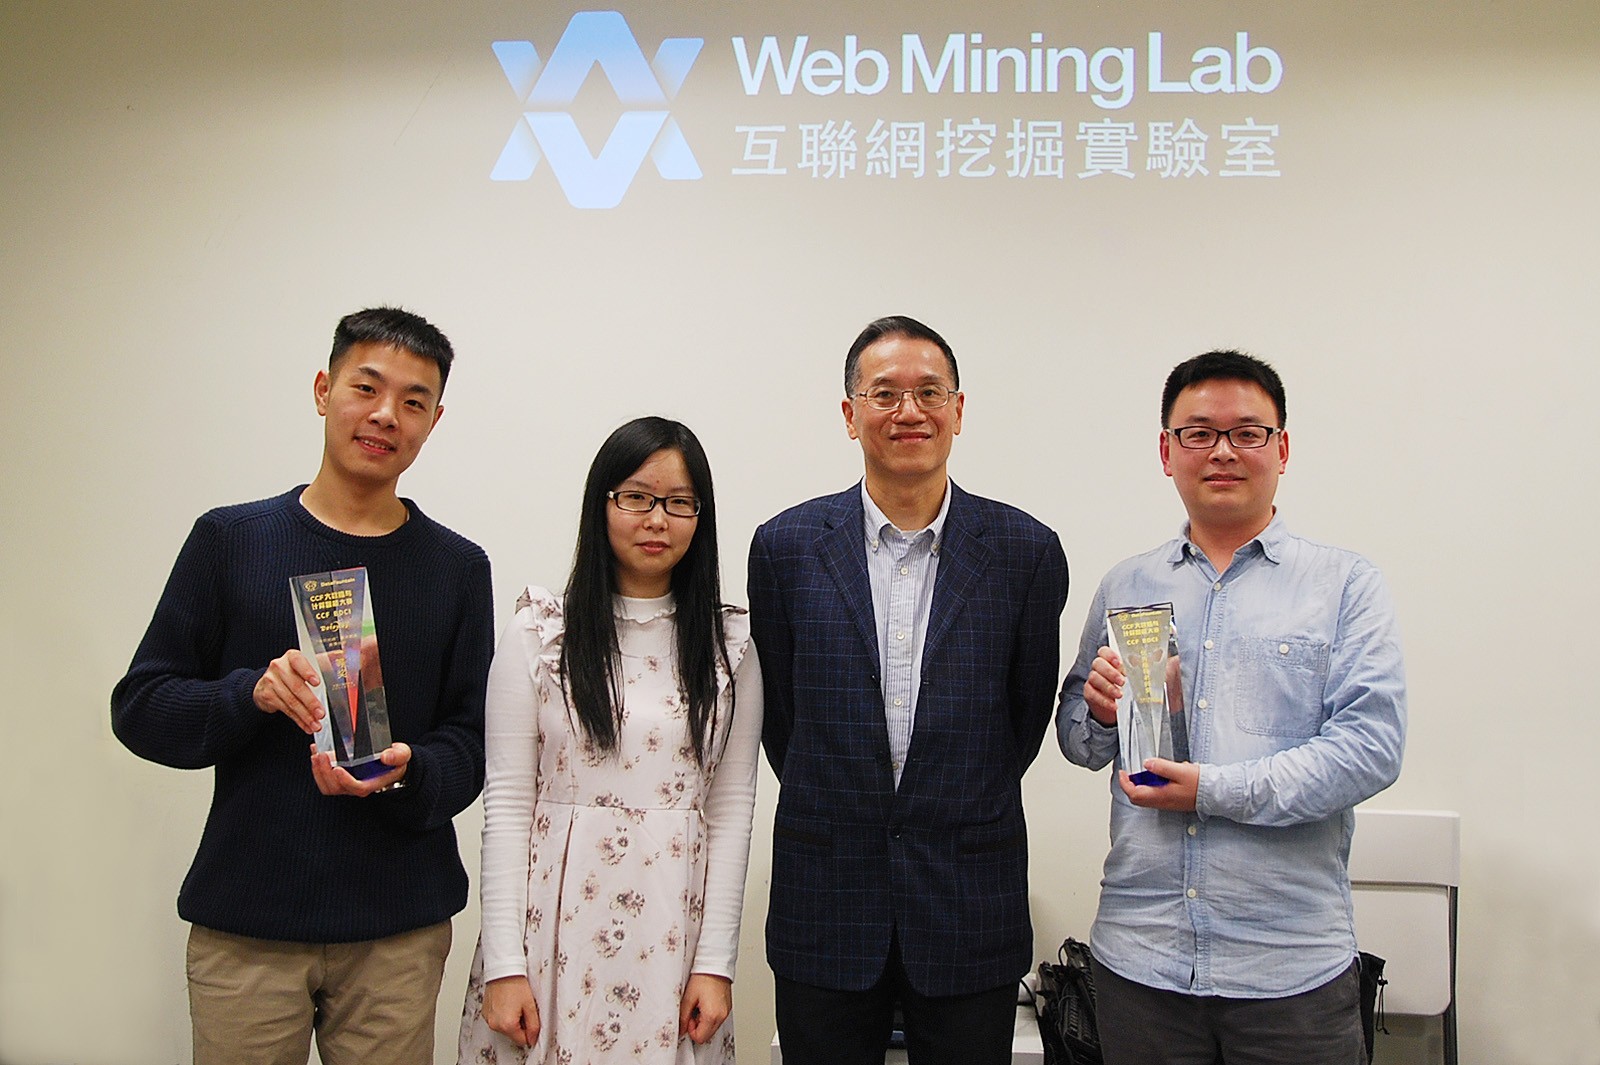 Chair Professor Jonathan Zhu Jianhua (second from right) and the winning team.